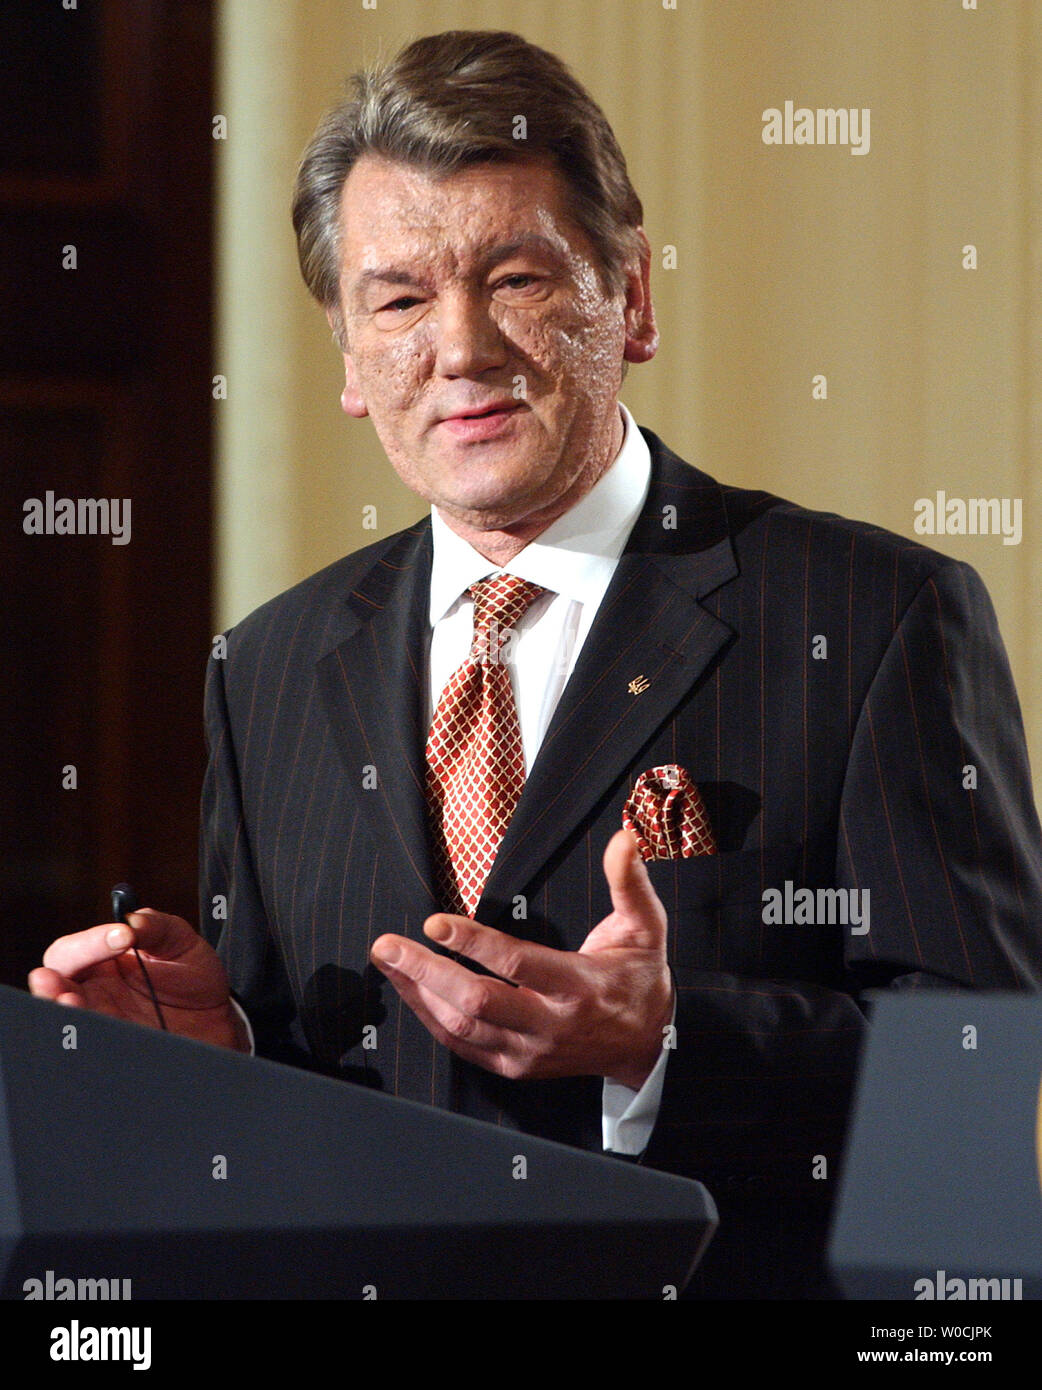 Ukrainian President Viktor Yushchenko speaks to the press during a media event with U.S. President George W. Bush in the East Room of the White House on April 4, 2005.   (UPI Photo/Roger L. Wollenberg) Stock Photo